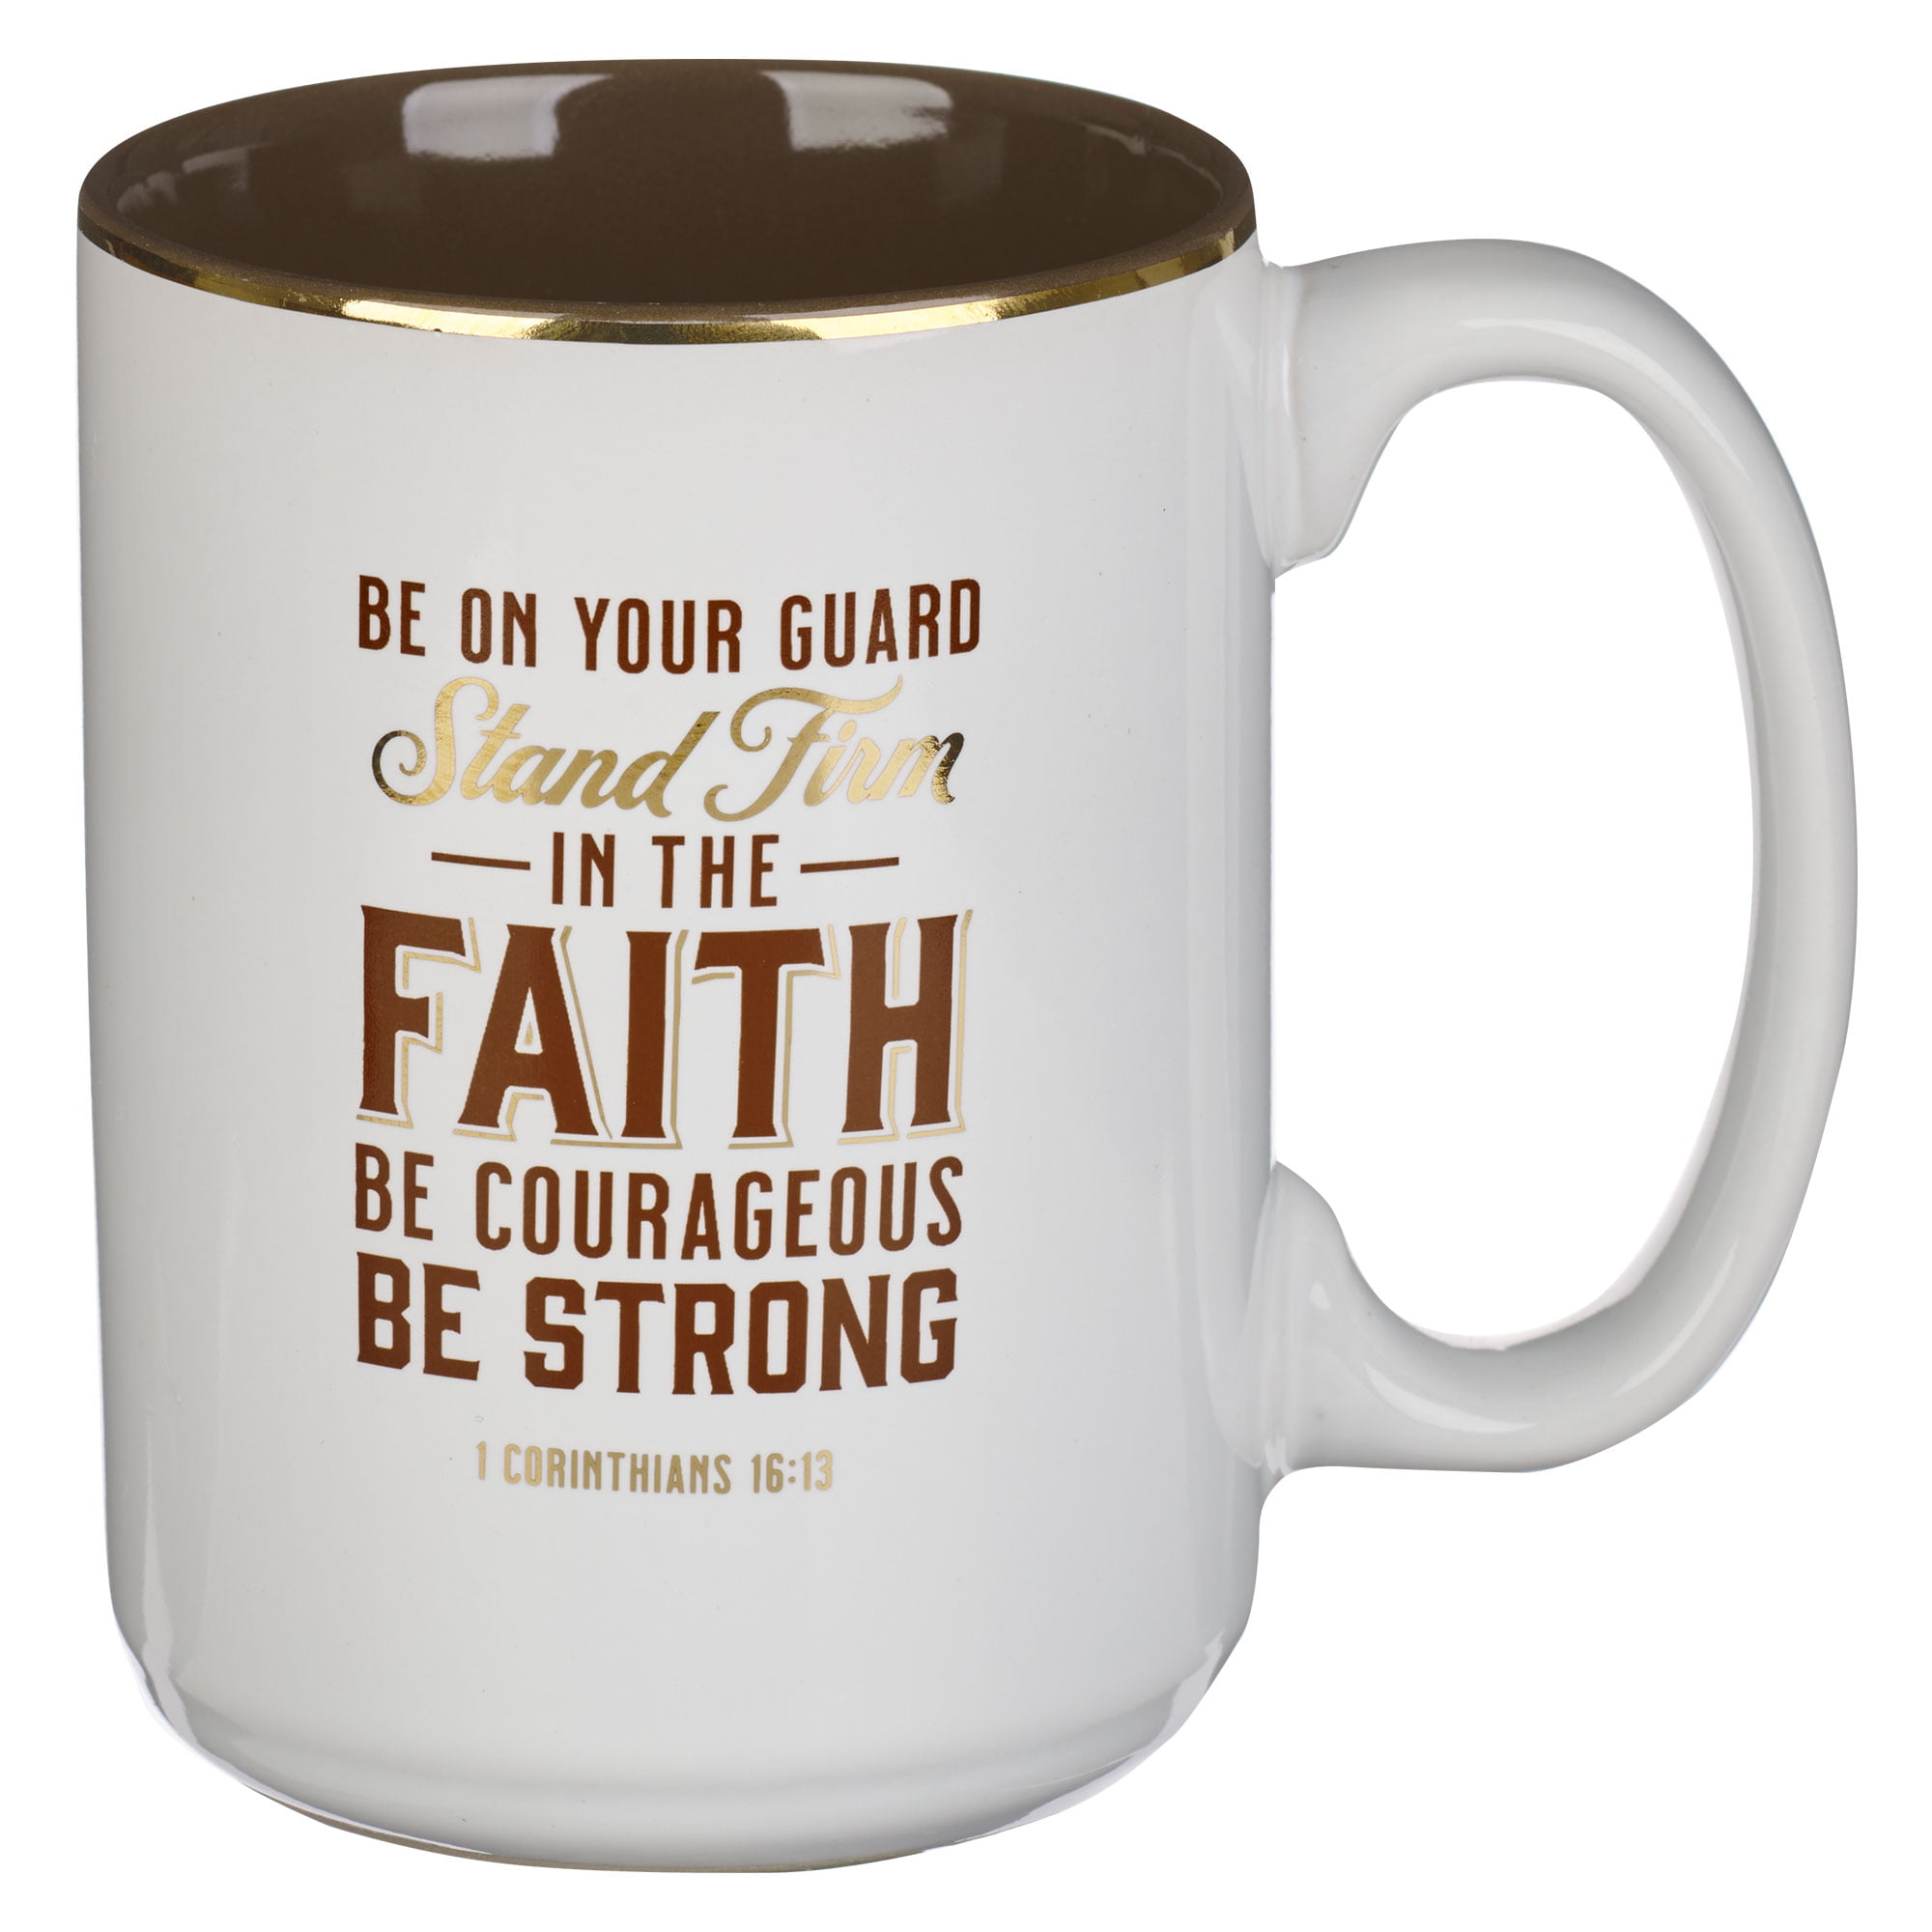 Christian Art Gifts Be Strong in The Lord Stainless Steel Camp Style Black  Travel Mug with Ephesians…See more Christian Art Gifts Be Strong in The